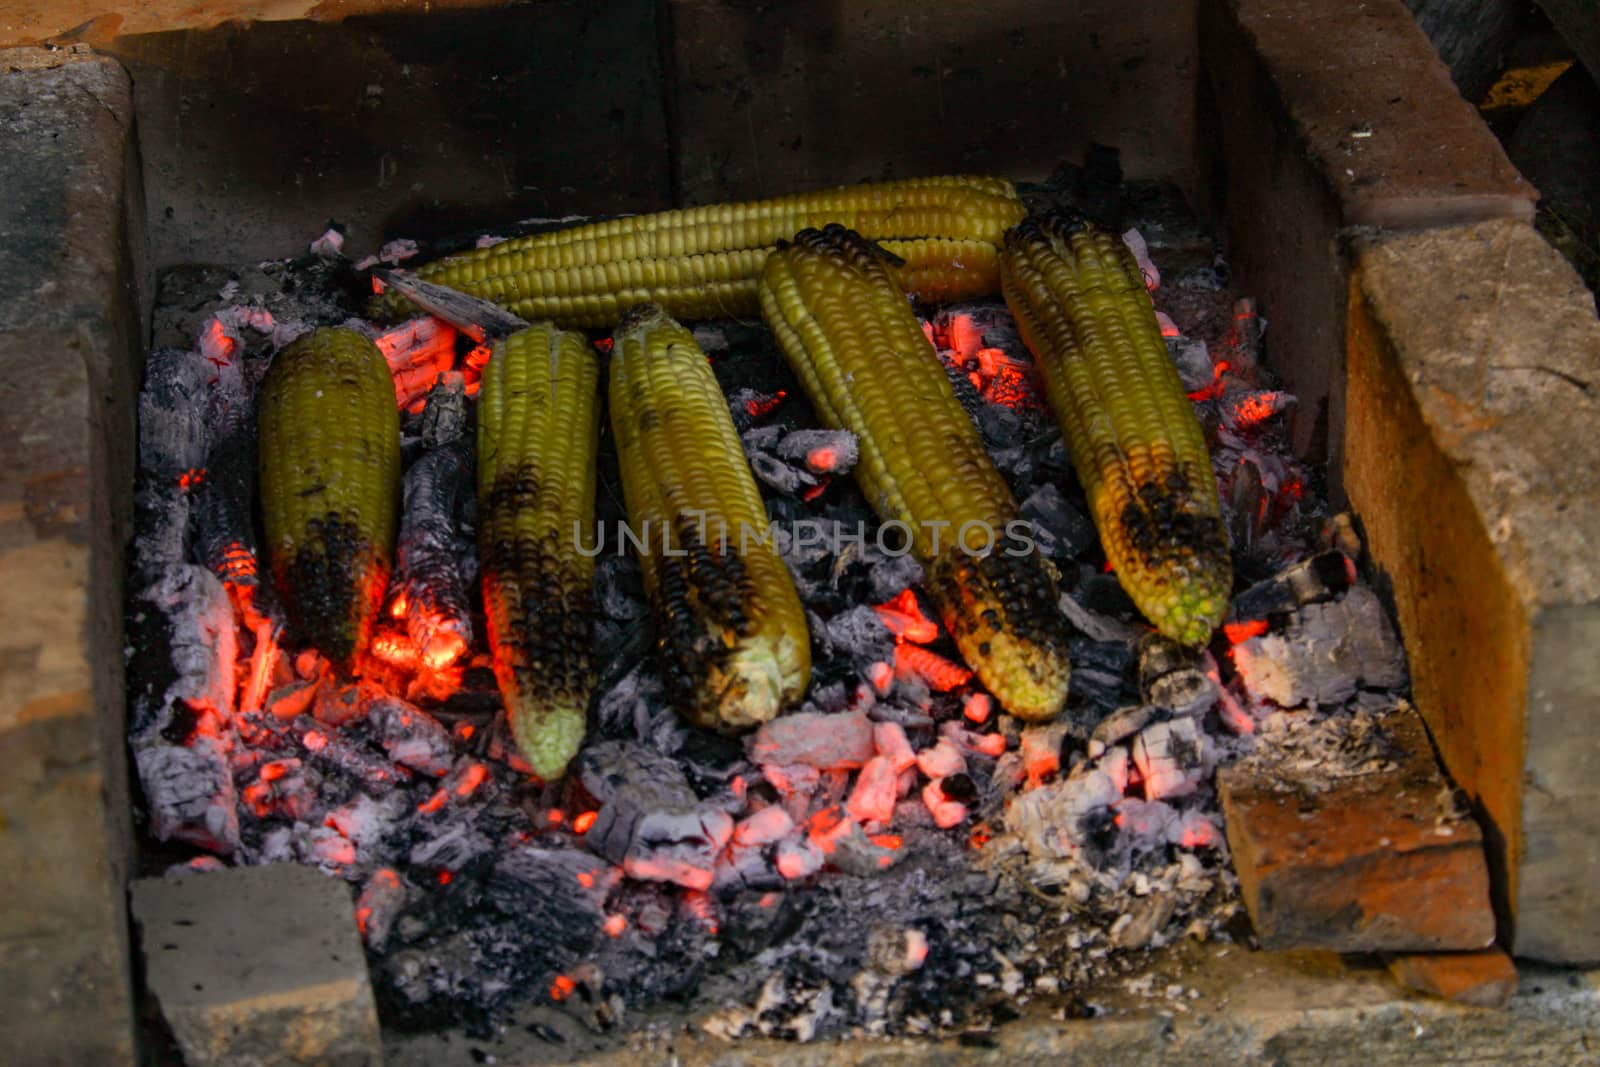 Summer nights by the fire. Roasting corn on the cob at night on summer days. by mahirrov